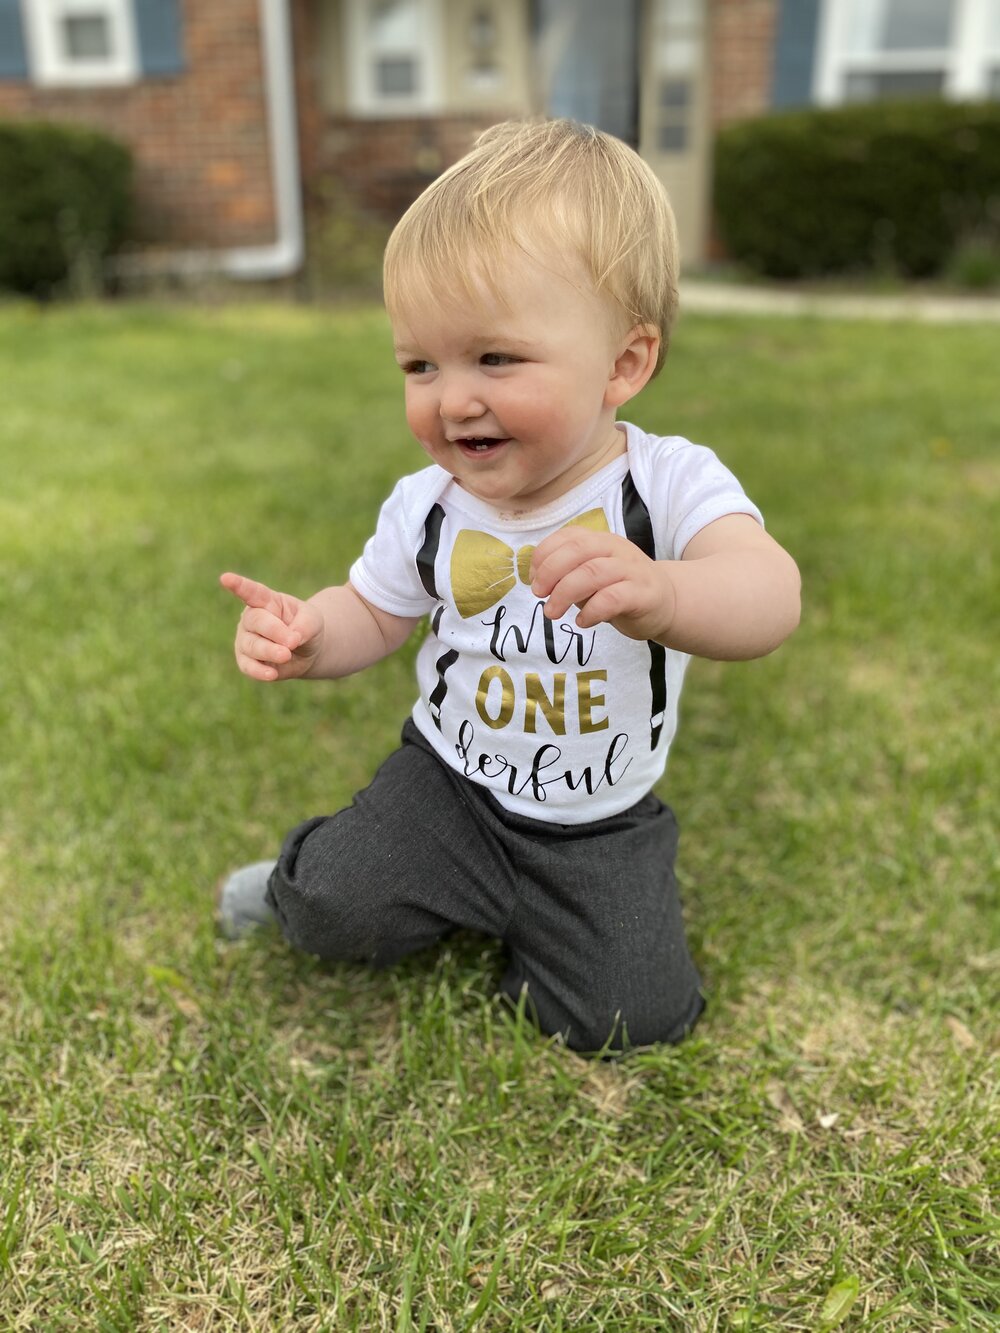 Wyatt turns one. Pictured wearing a cute t-shirt that looks like it has braces and bow. Photo: Angela Hatem